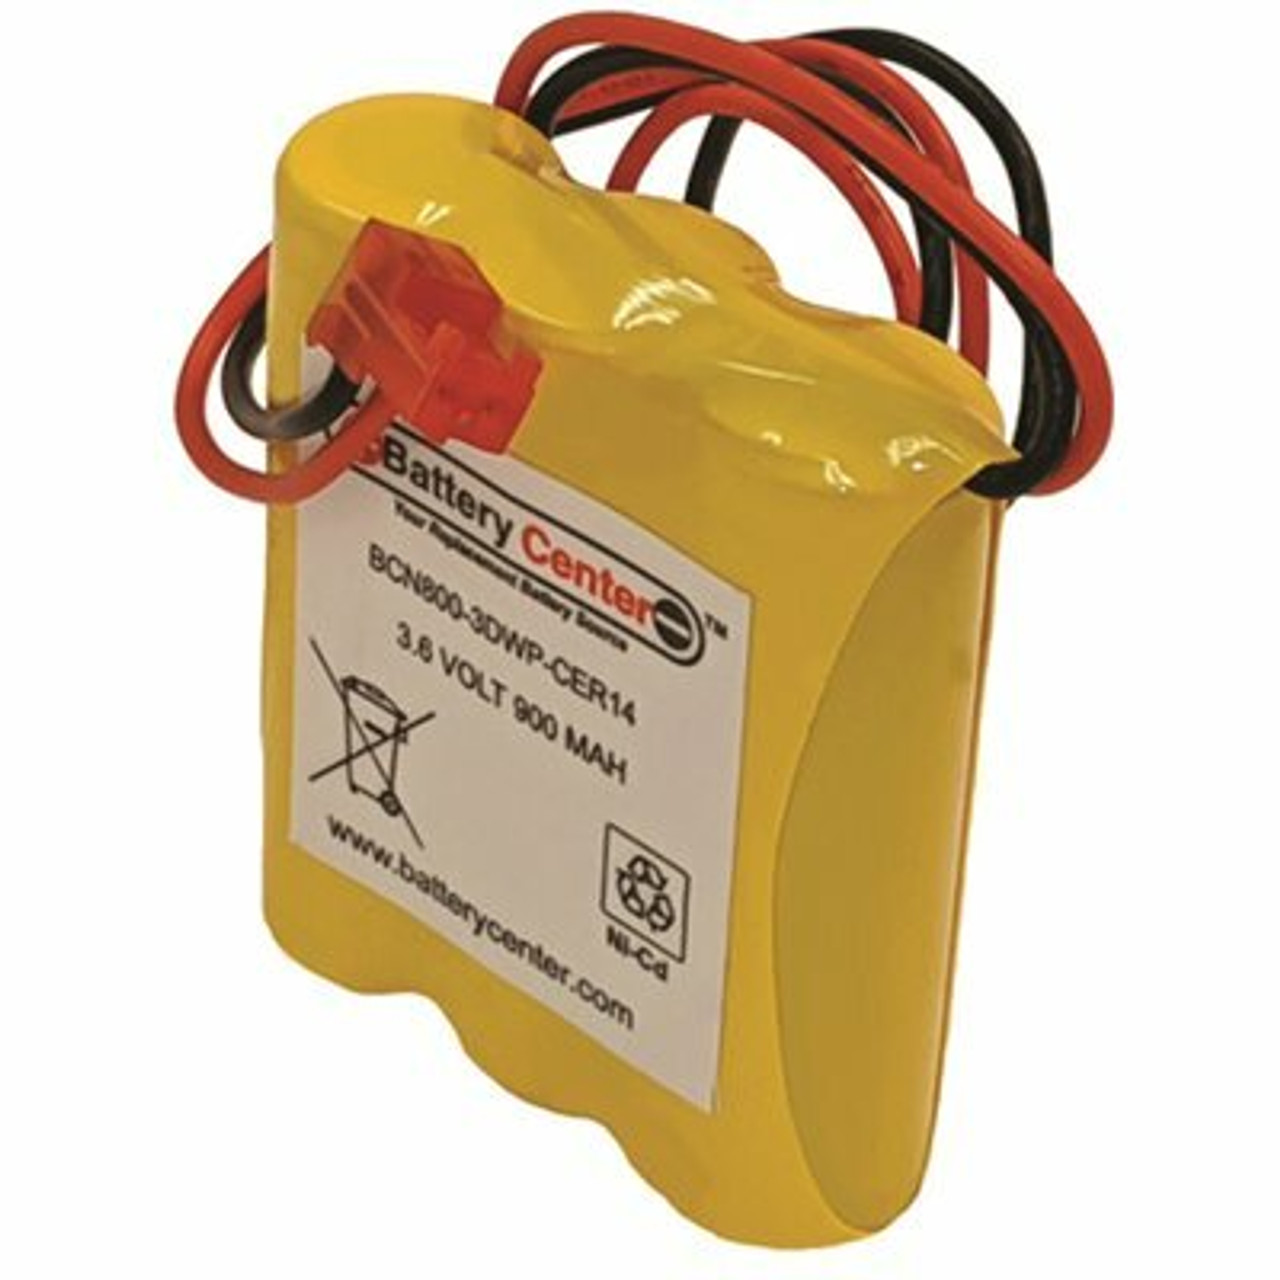 3.6-Volt 900 Mah Replacement For The Bnp3700B Nickel Cadmium Emergency Lighting Battery (Rechargeable)